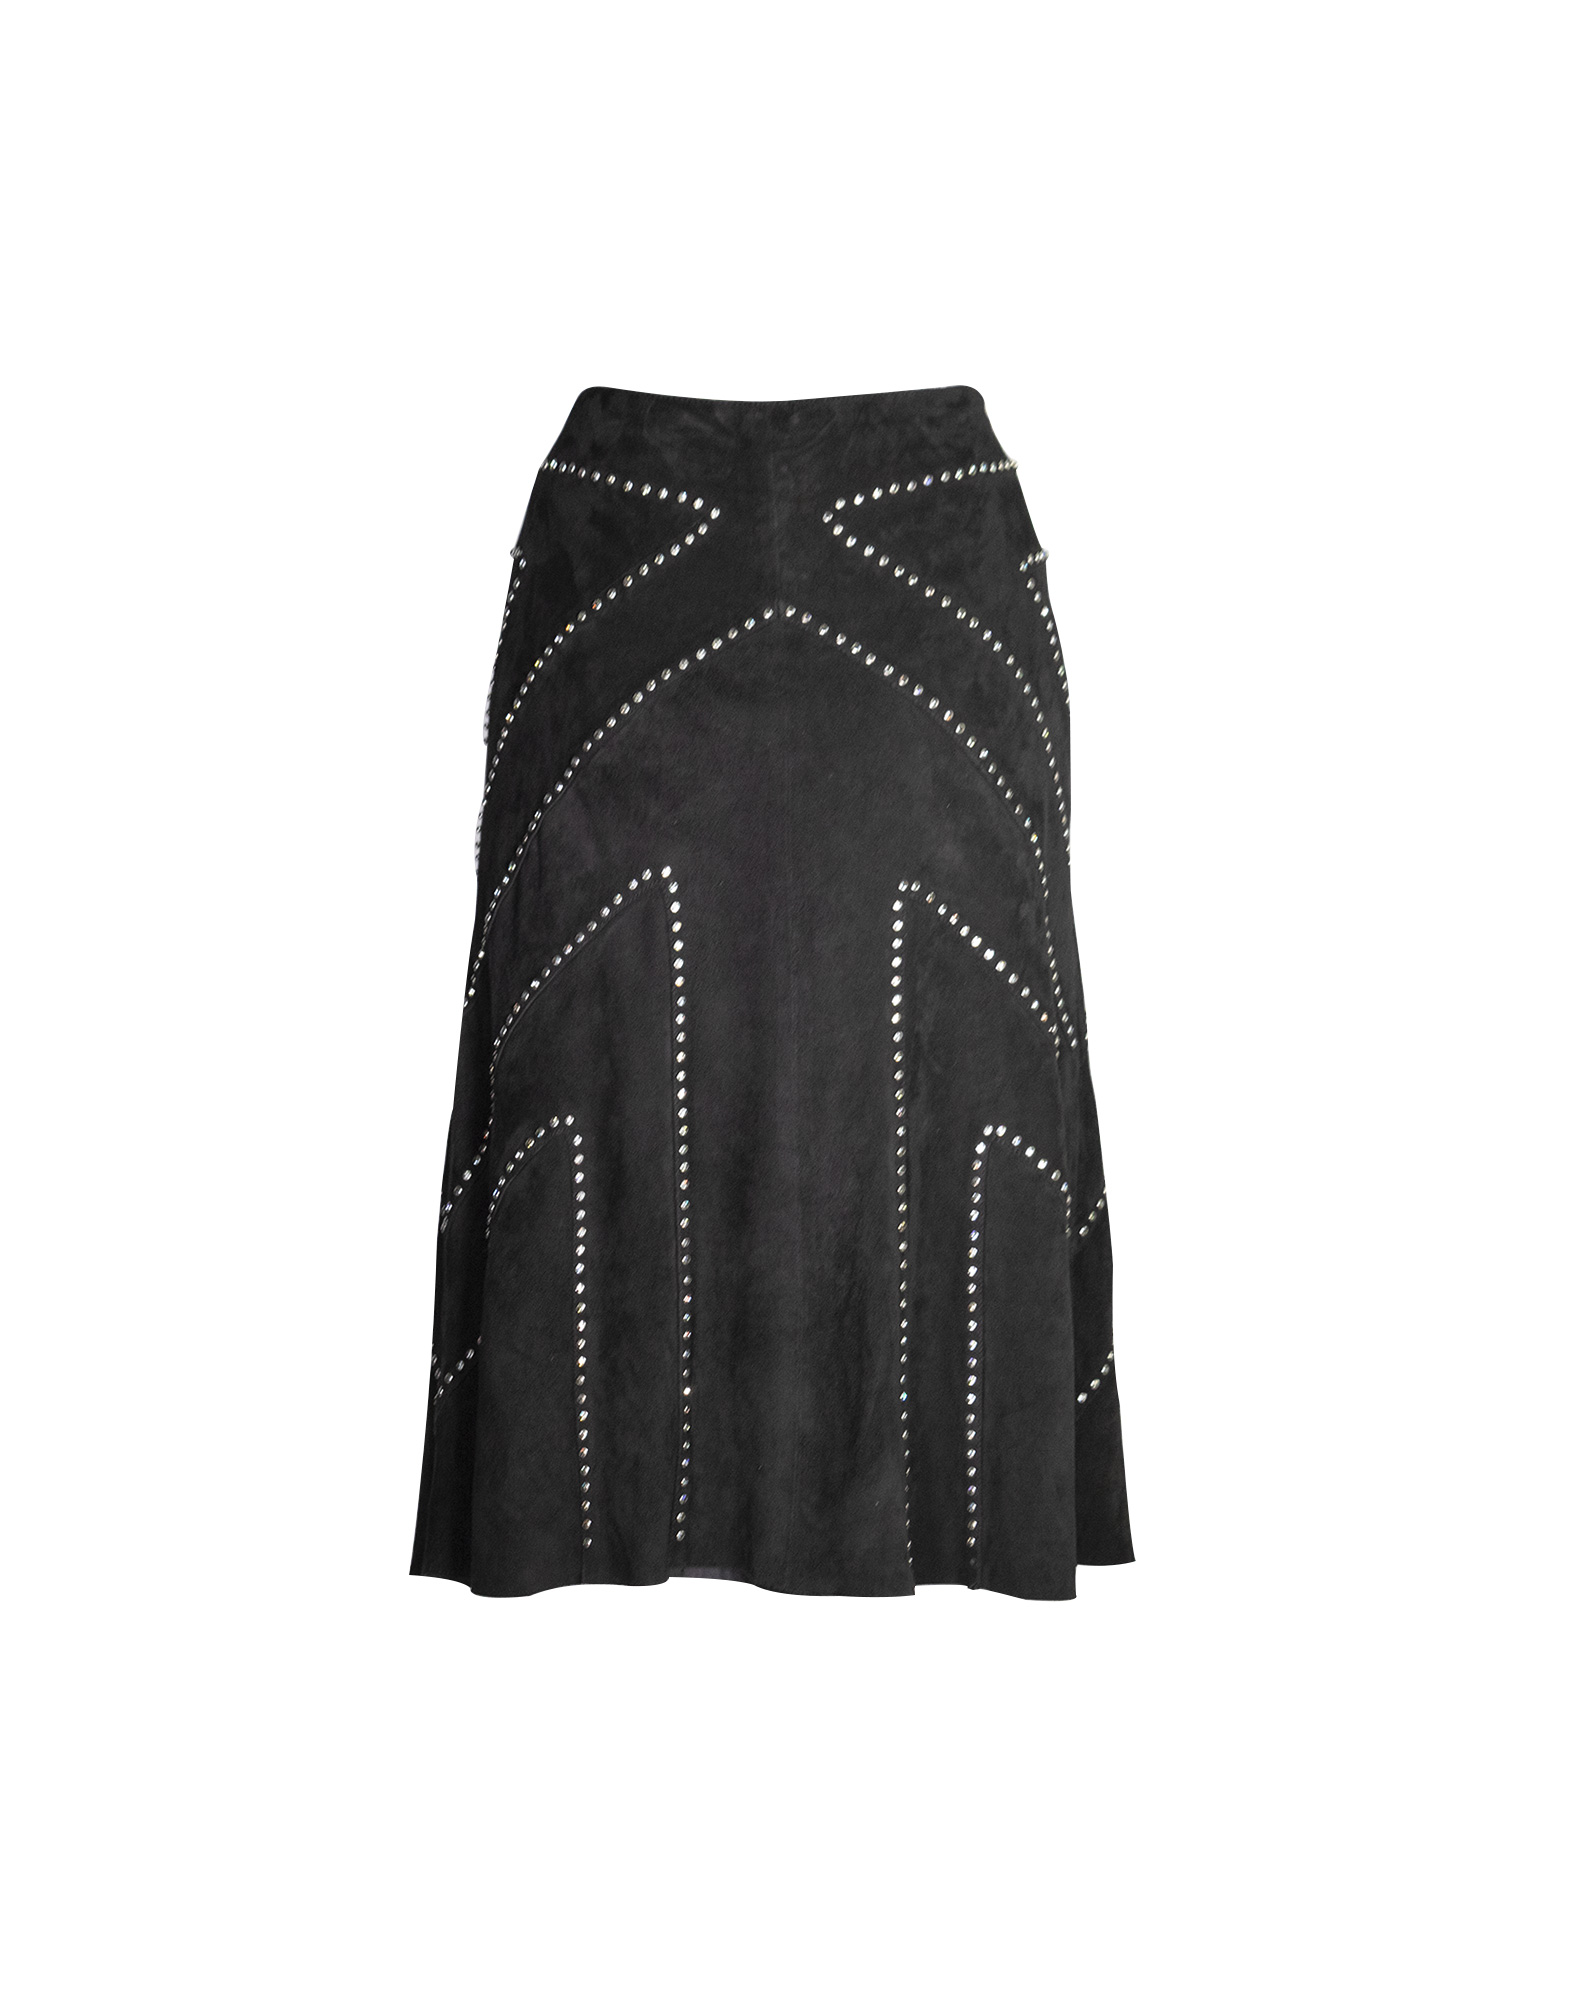 Gai Mattiolo - 90s leather skirt with studs